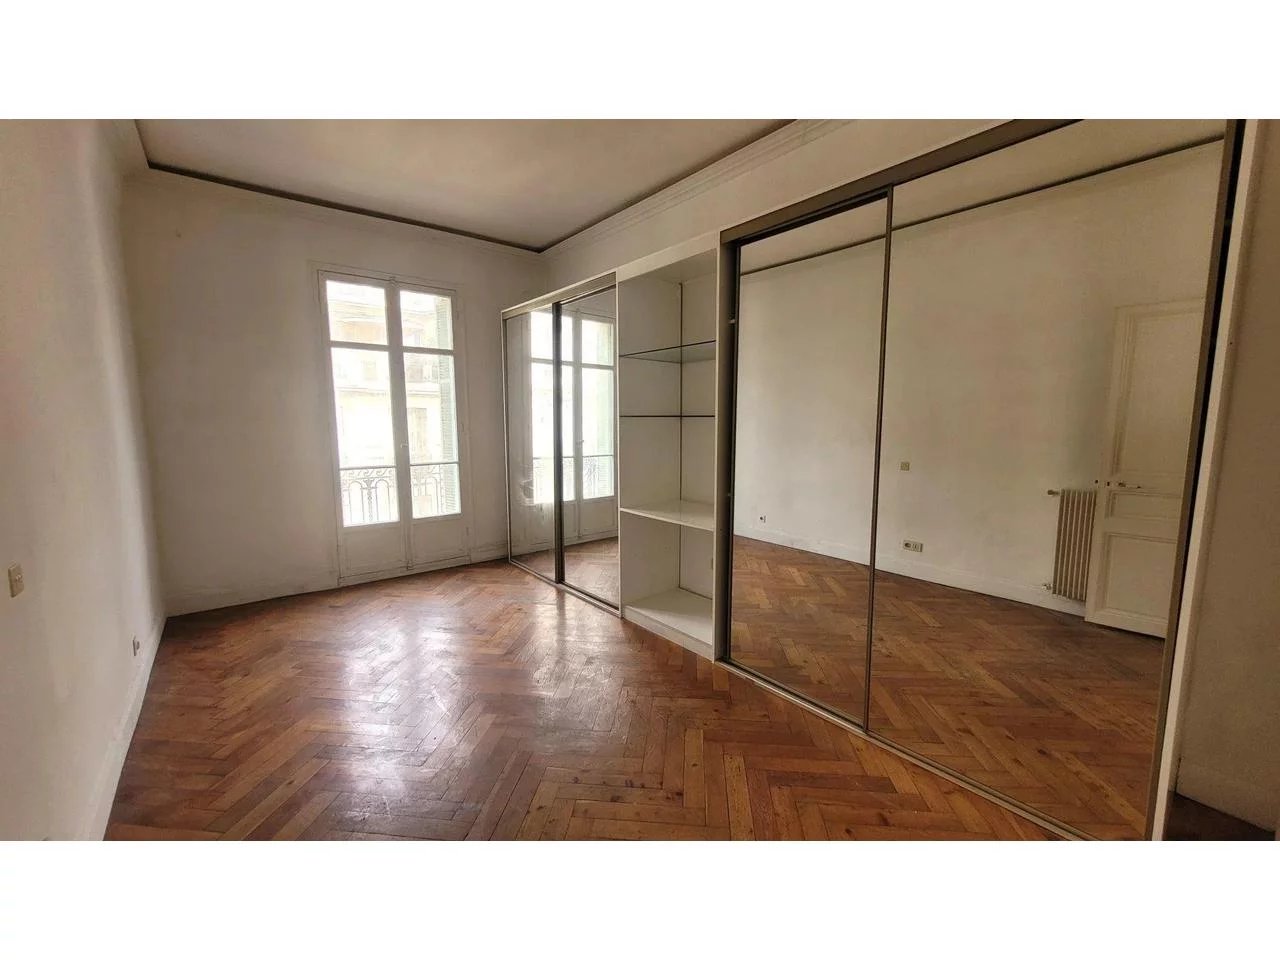 Appartement  4 Rooms 113m2  for sale   598 000 €